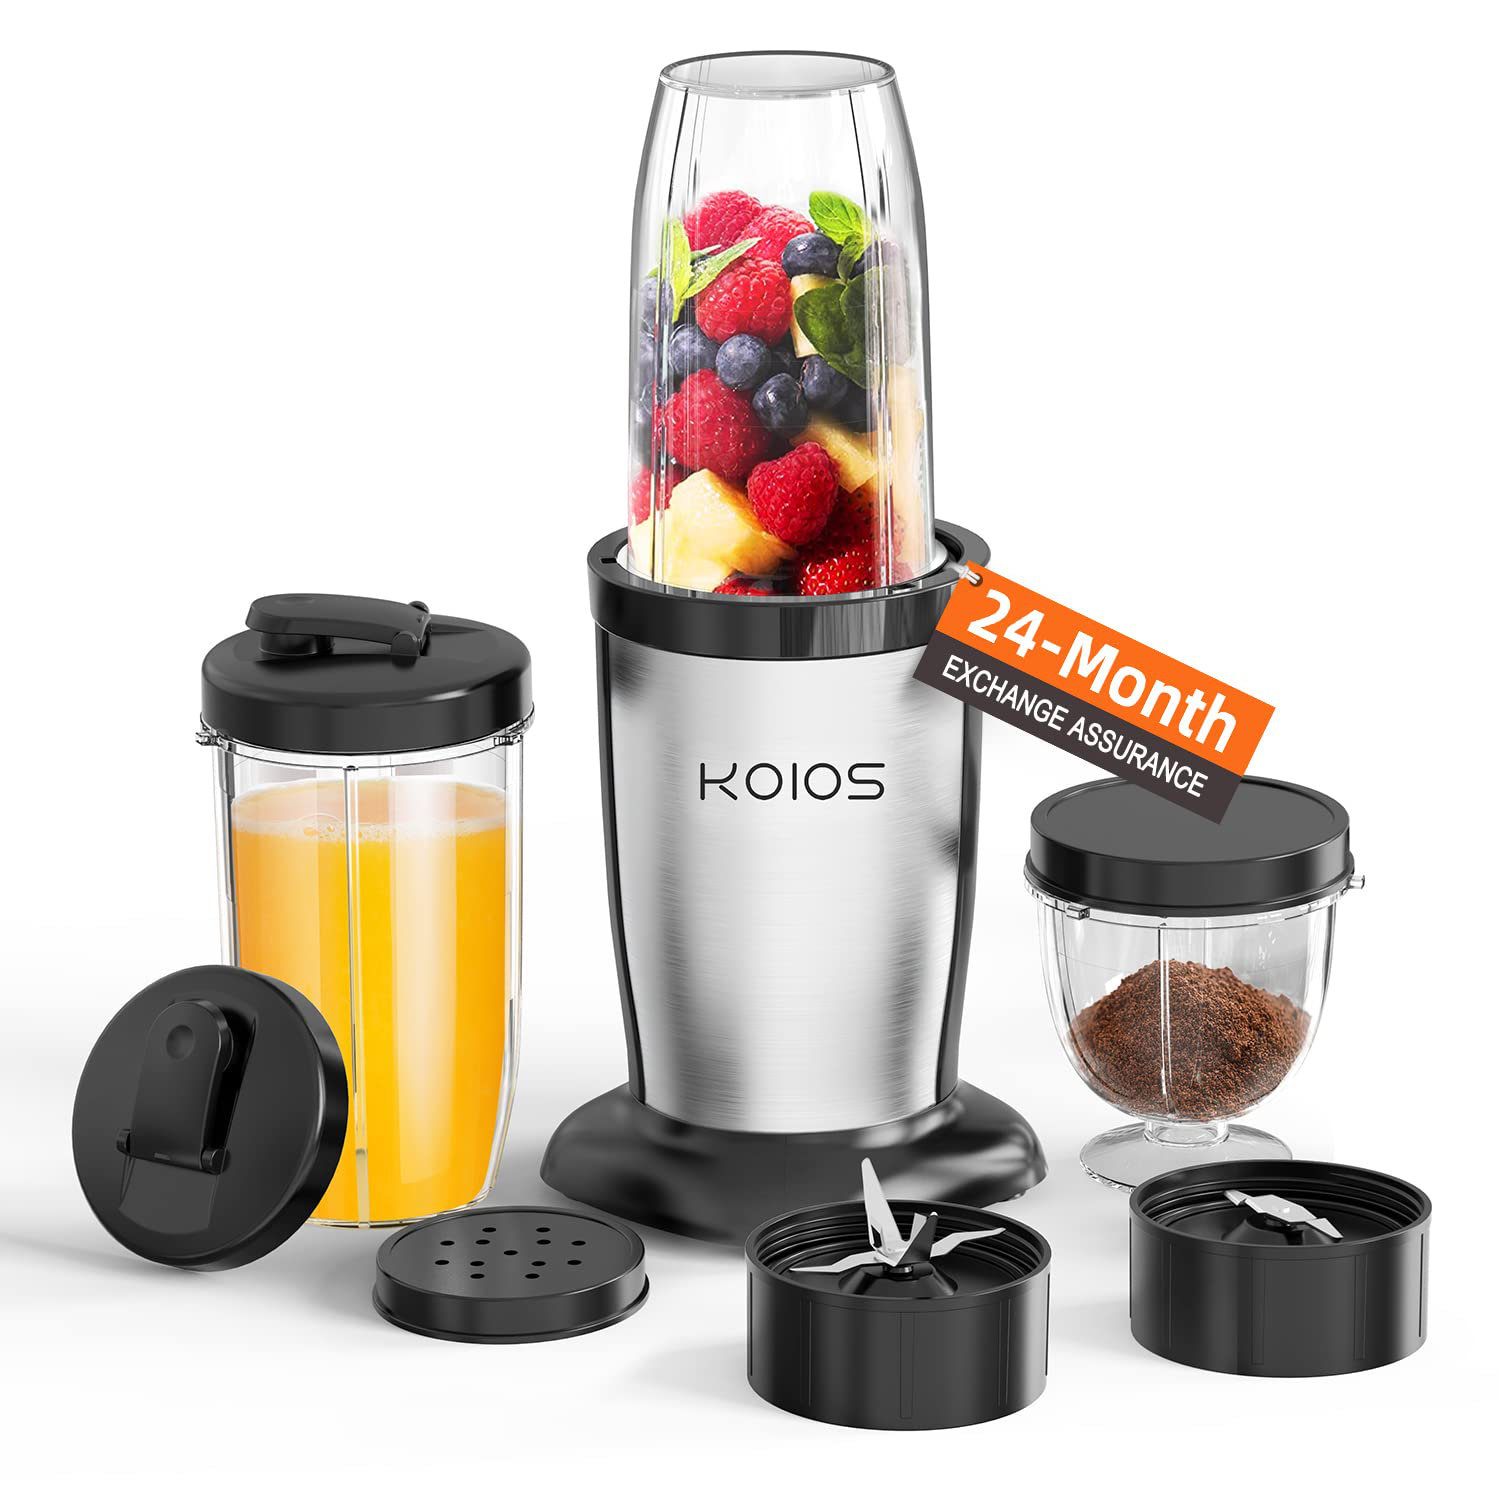 Tribest PB-250 Personal Blender Review: Smoothies and More